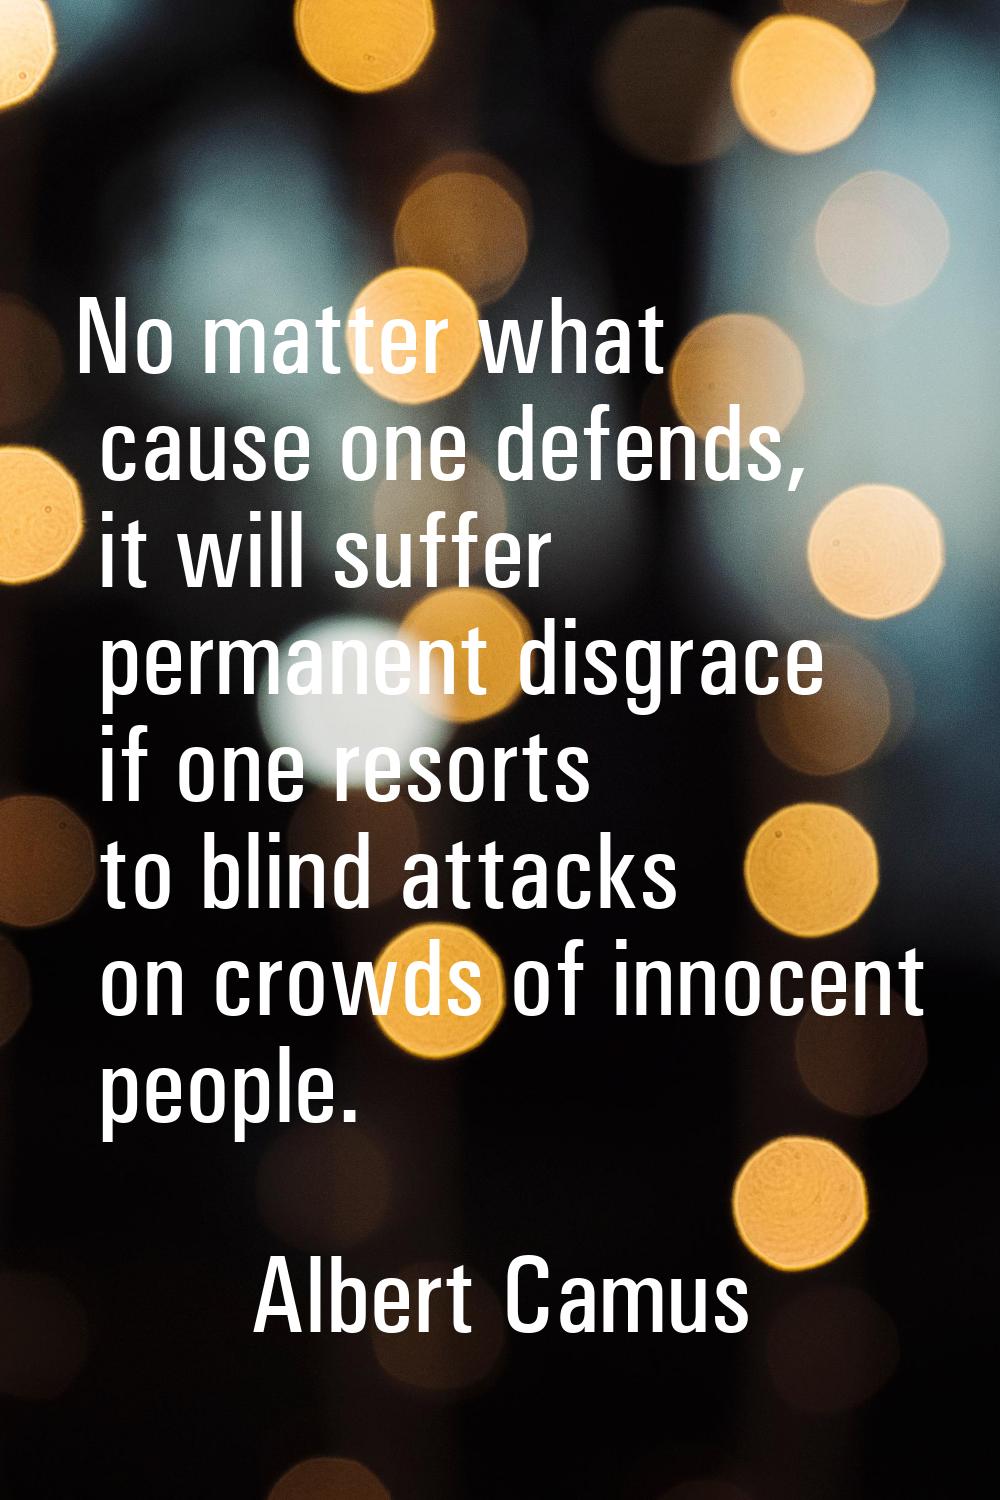 No matter what cause one defends, it will suffer permanent disgrace if one resorts to blind attacks